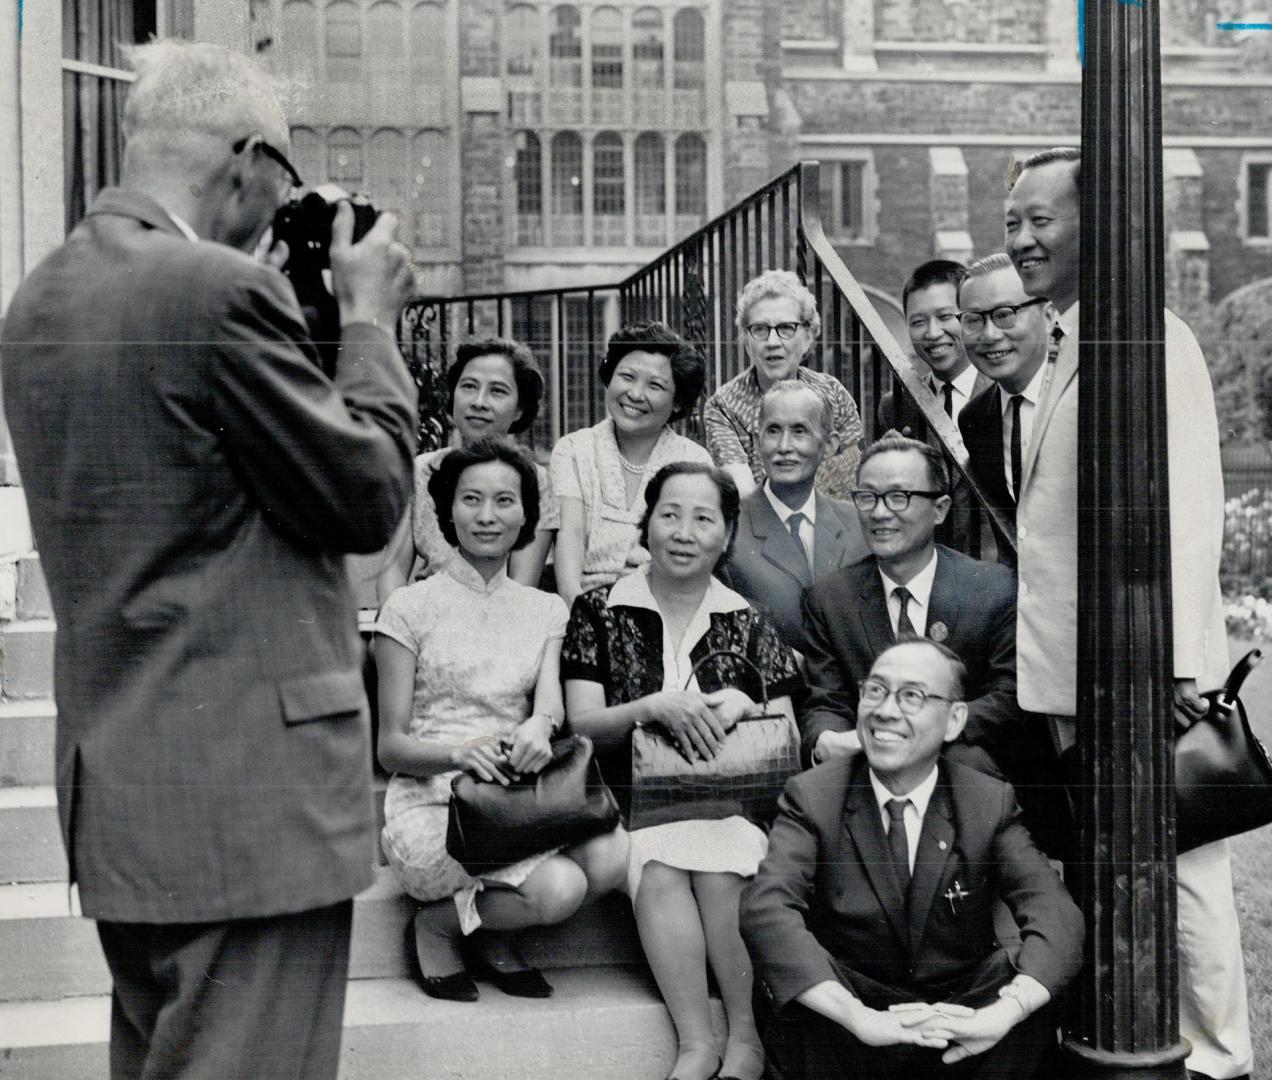 Presbyterian Church Moderator Dr. Hugh McMillan Turns camera to snap a picture of the Formosan Visitors